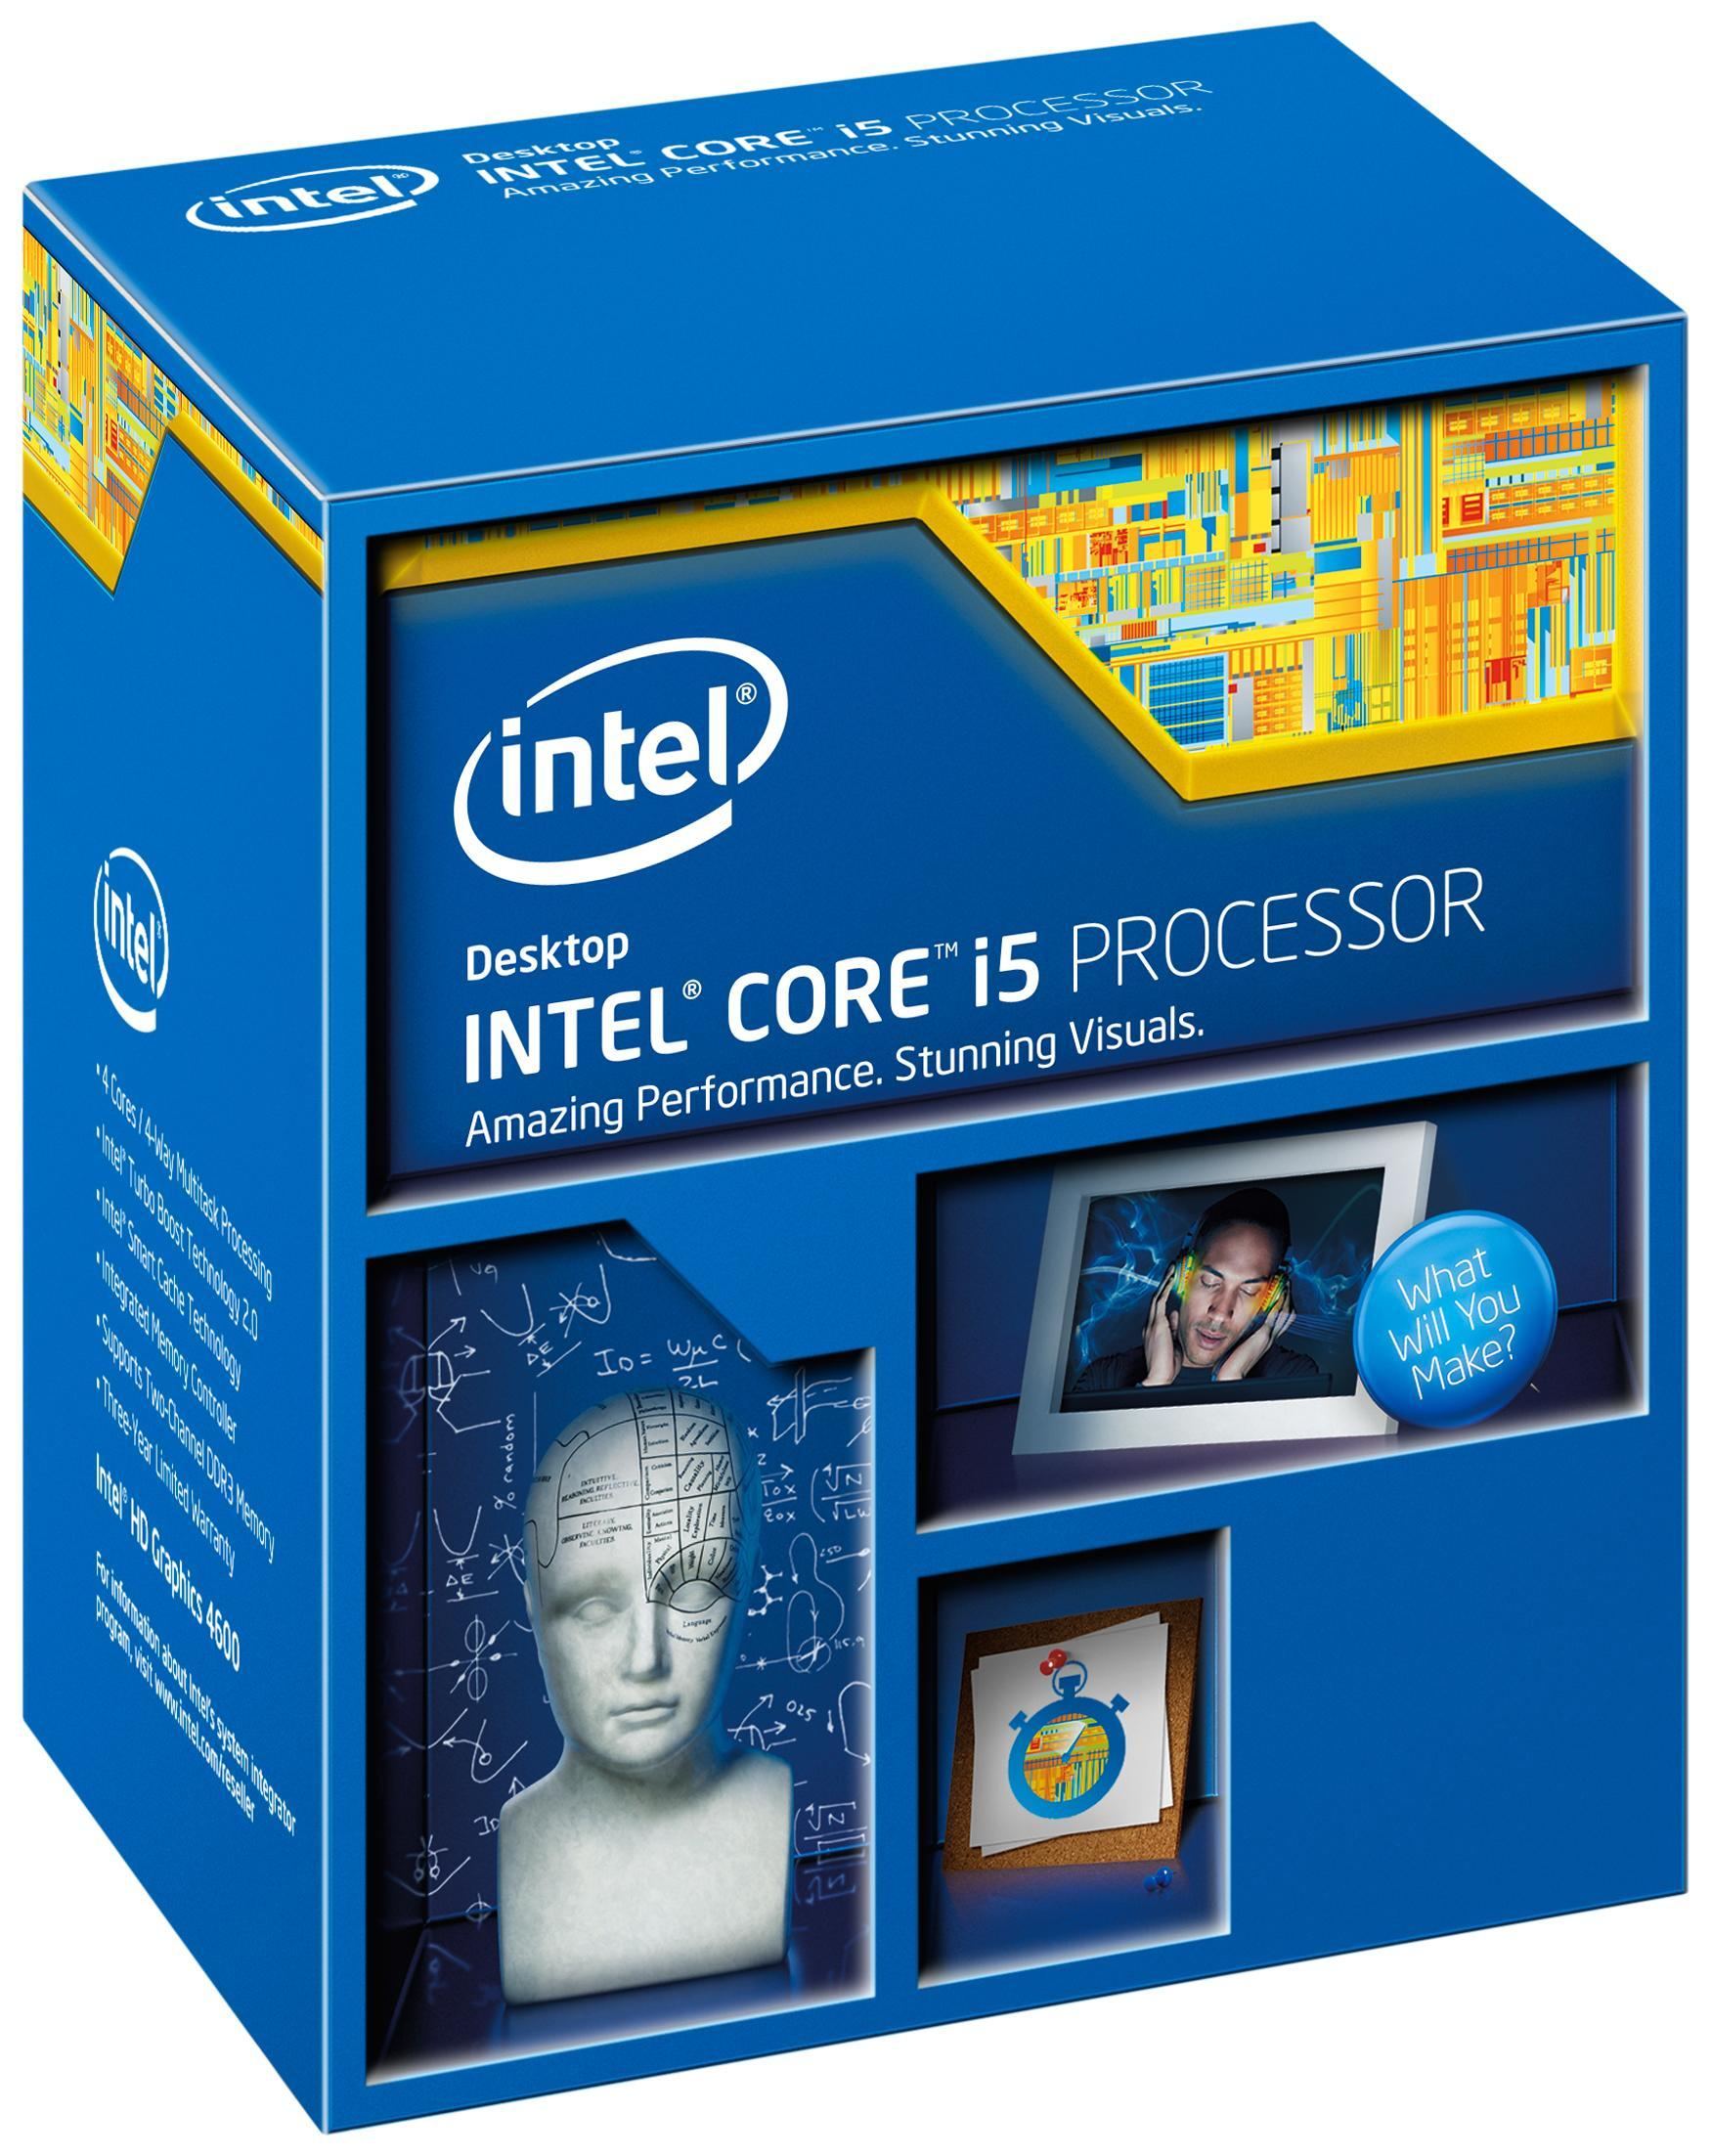 Intel Core i5-4460, 4x 3.20GHz, boxed